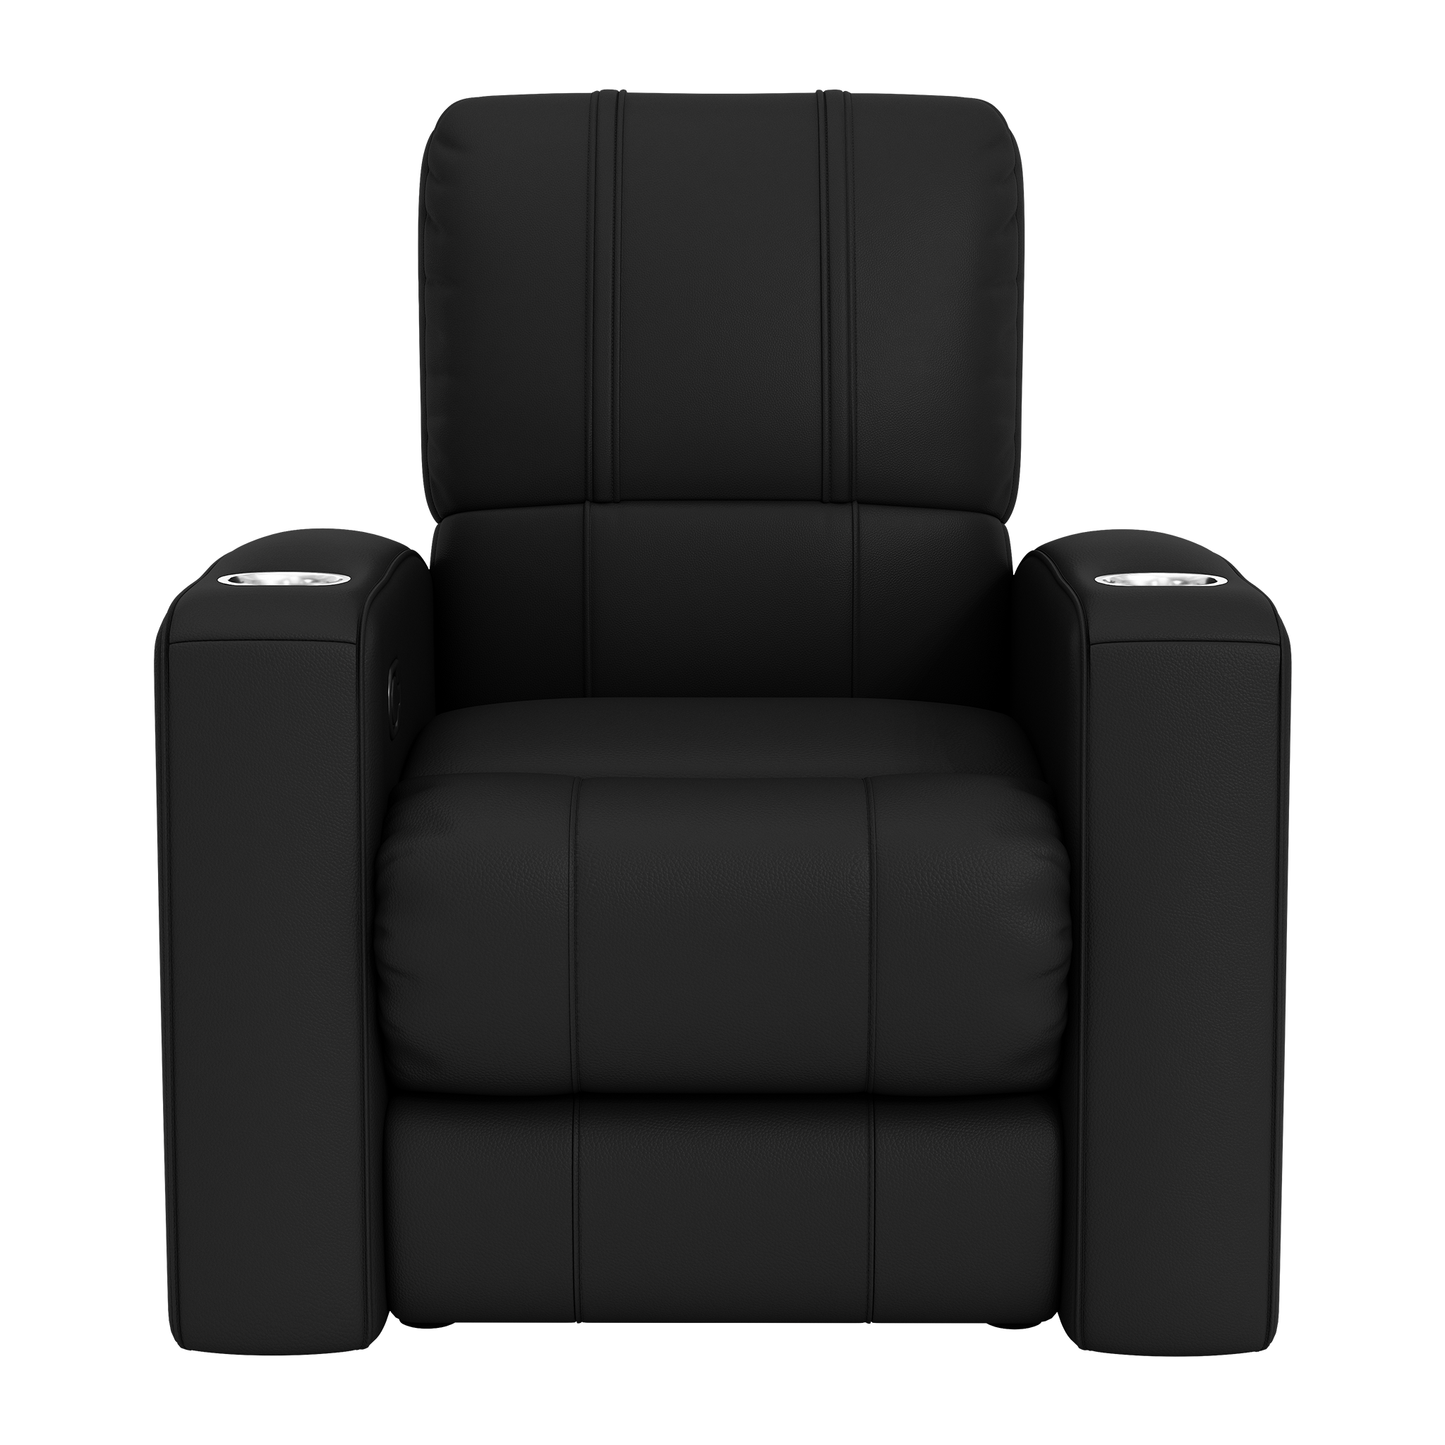 Relax Home Theater Recliner with Ball State Cardinals